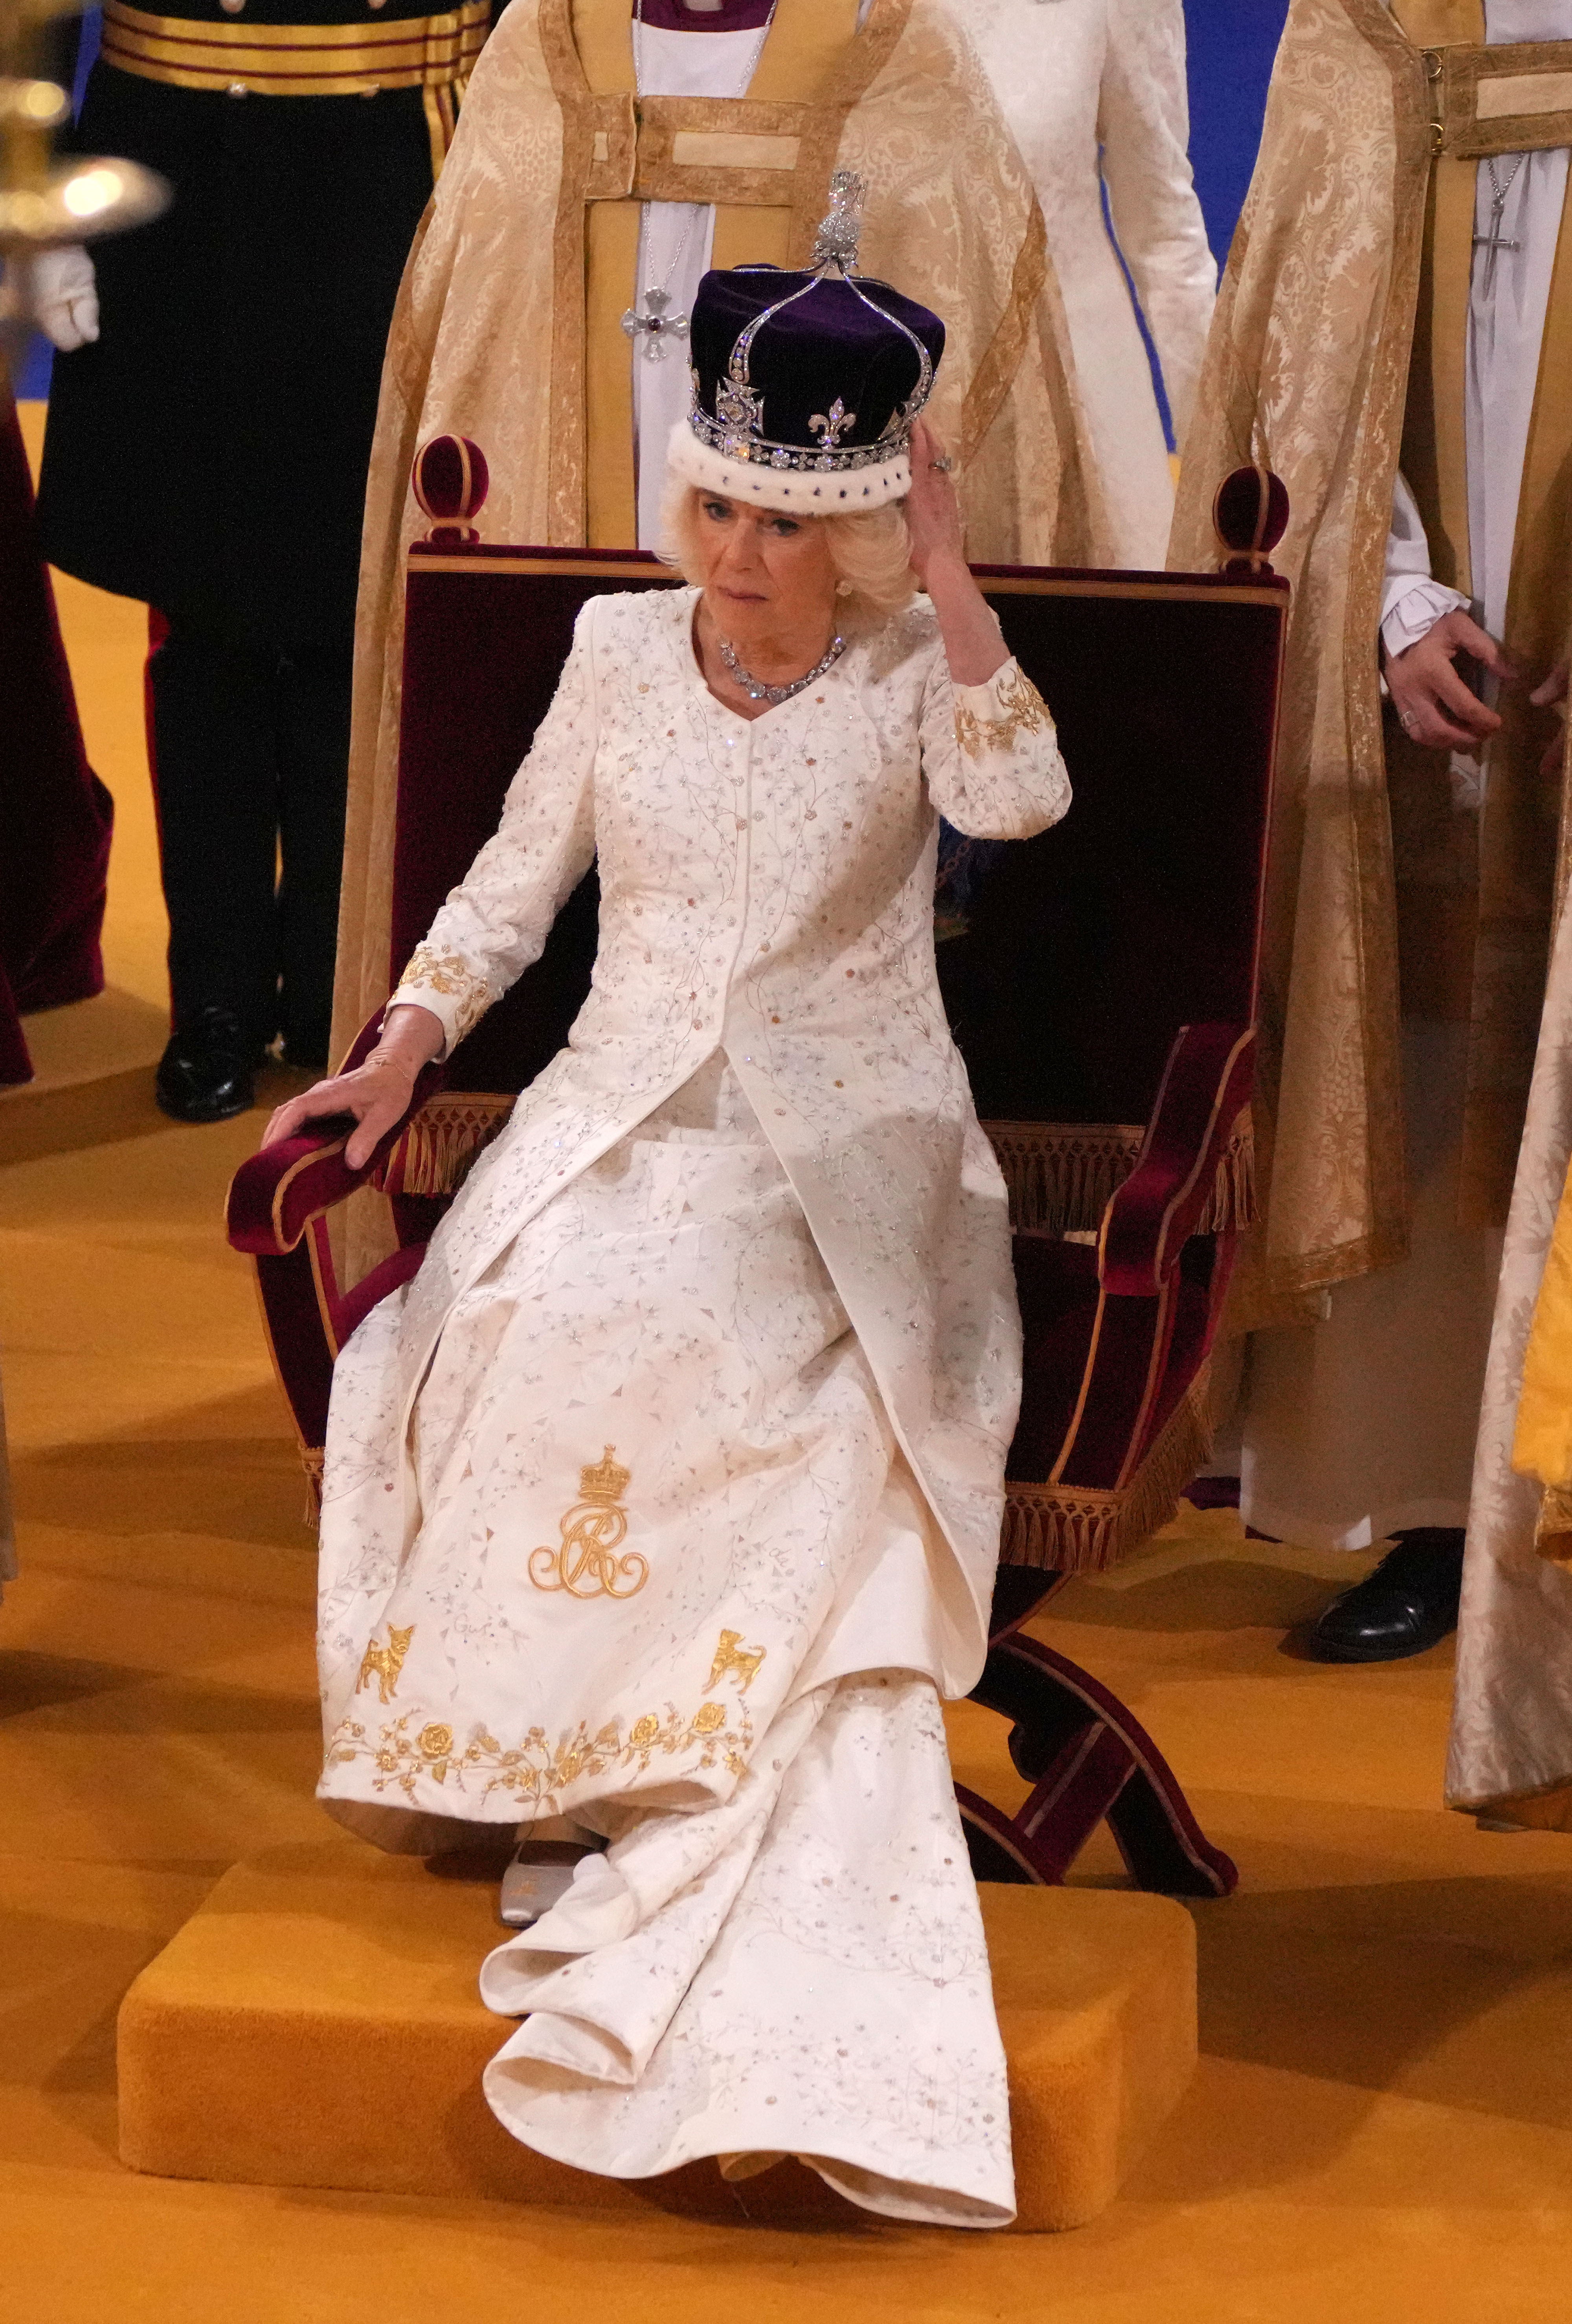 Kate Middleton, The Princess Of Wales's Alexander McQueen Coronation Gown  Features A Subtle Nod To Her Wedding Dress